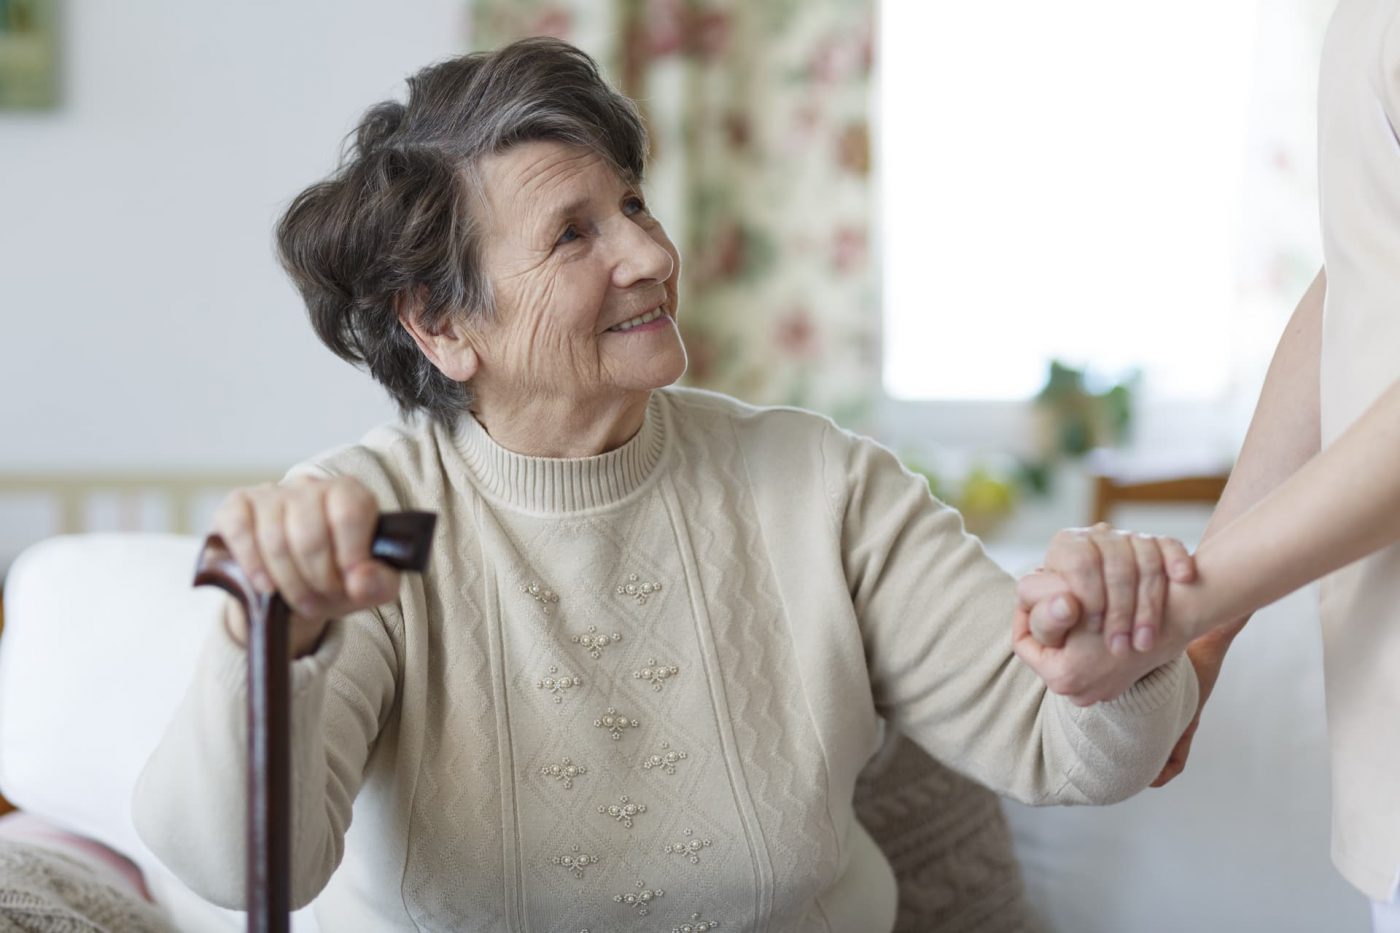 Smiling senior woman holding a cane and looking at her caregiver